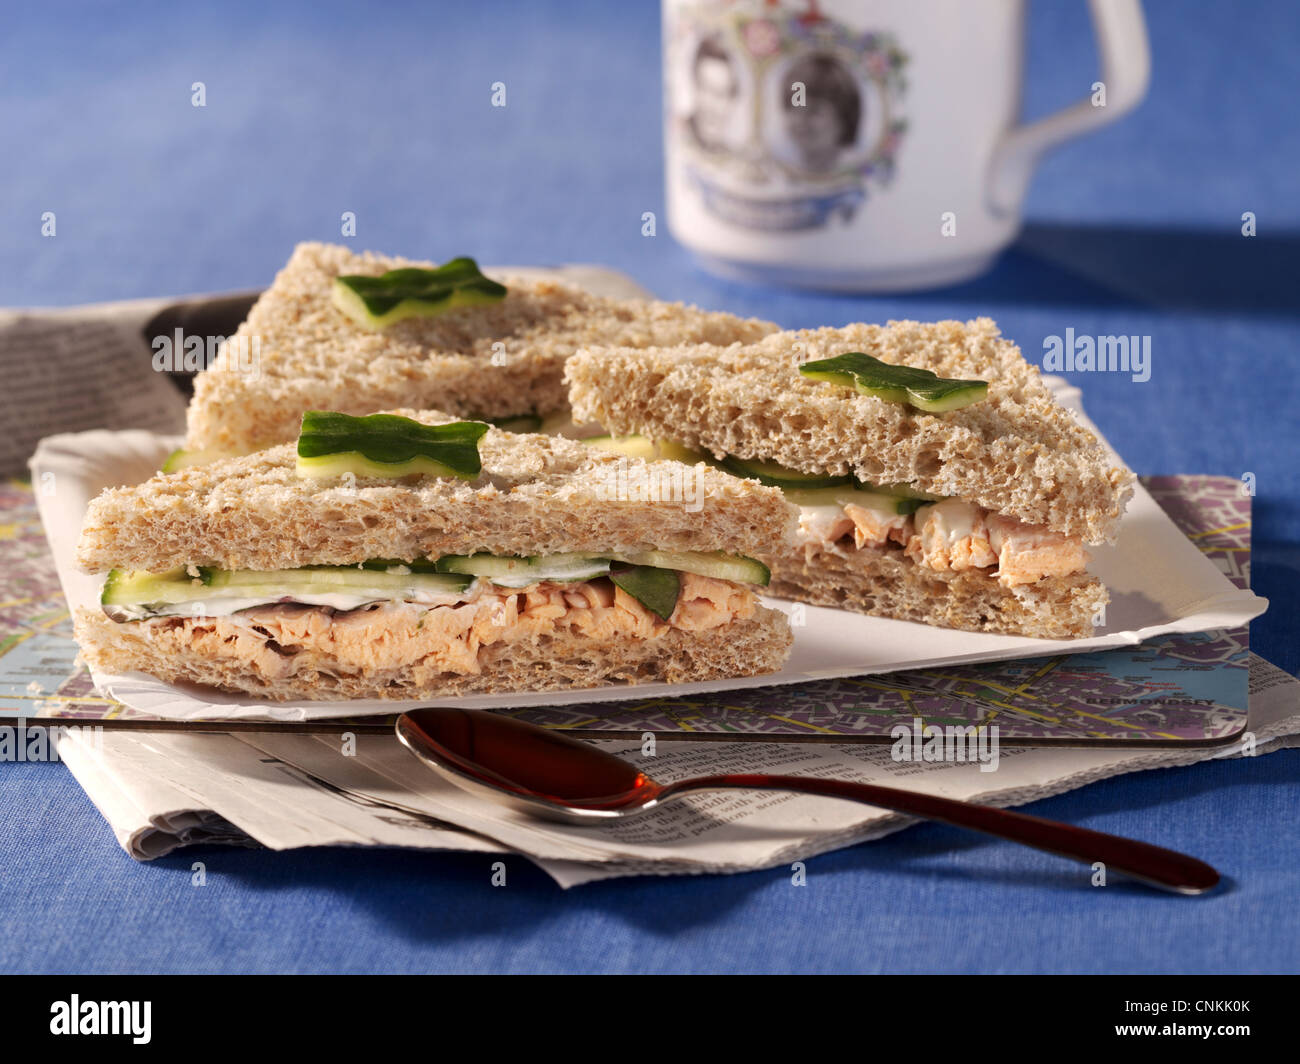 Sandwich with salmon and cucumber Stock Photo